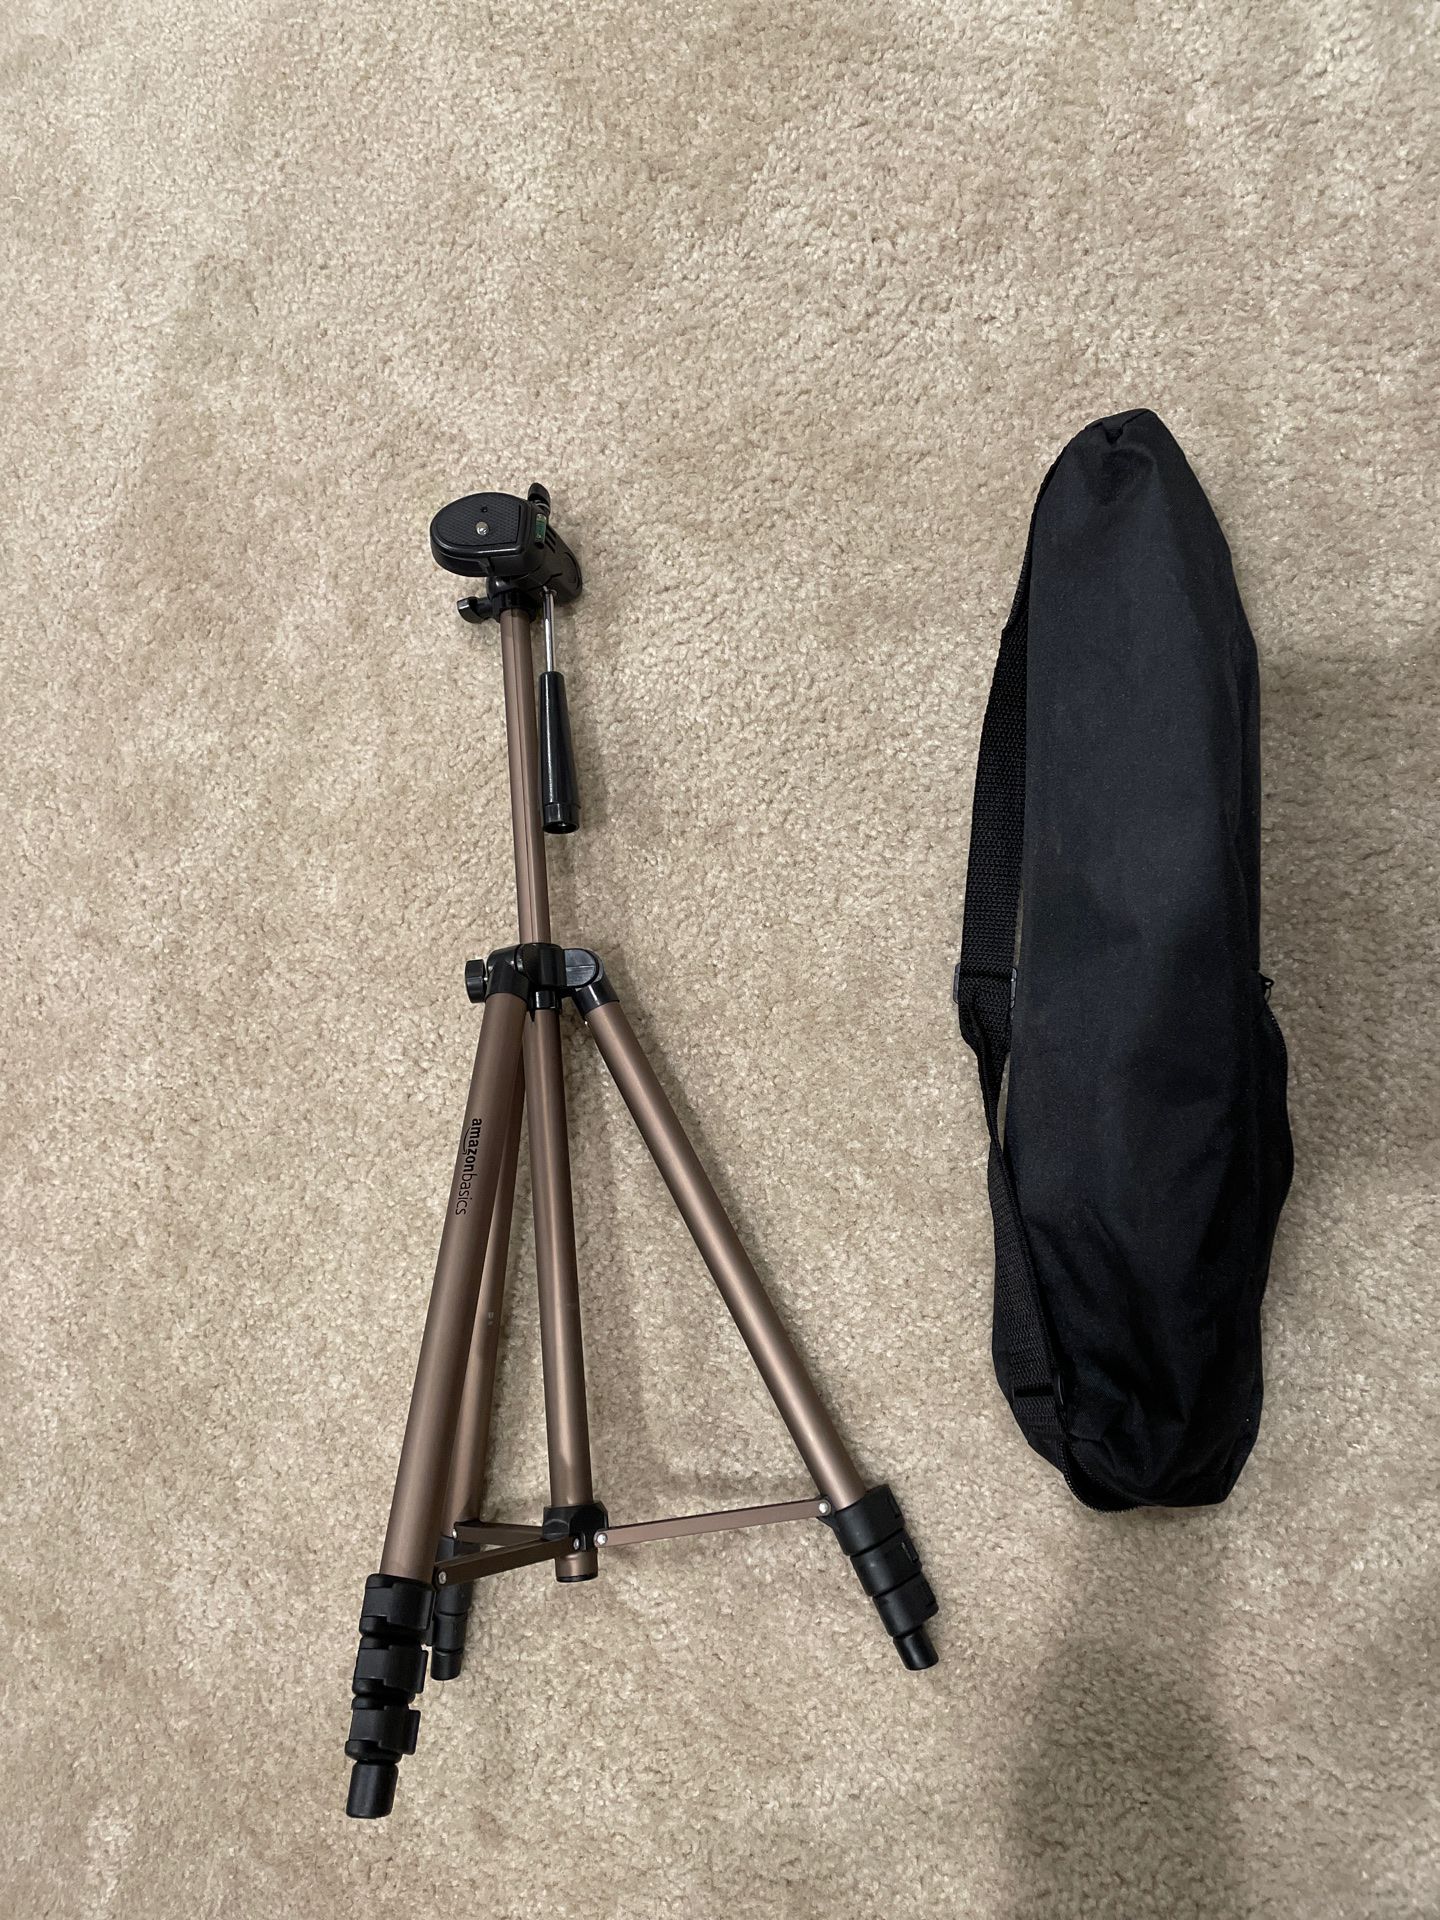 Lightweight Camera Mount Tripod Stand With Bag - 16.5 - 50”